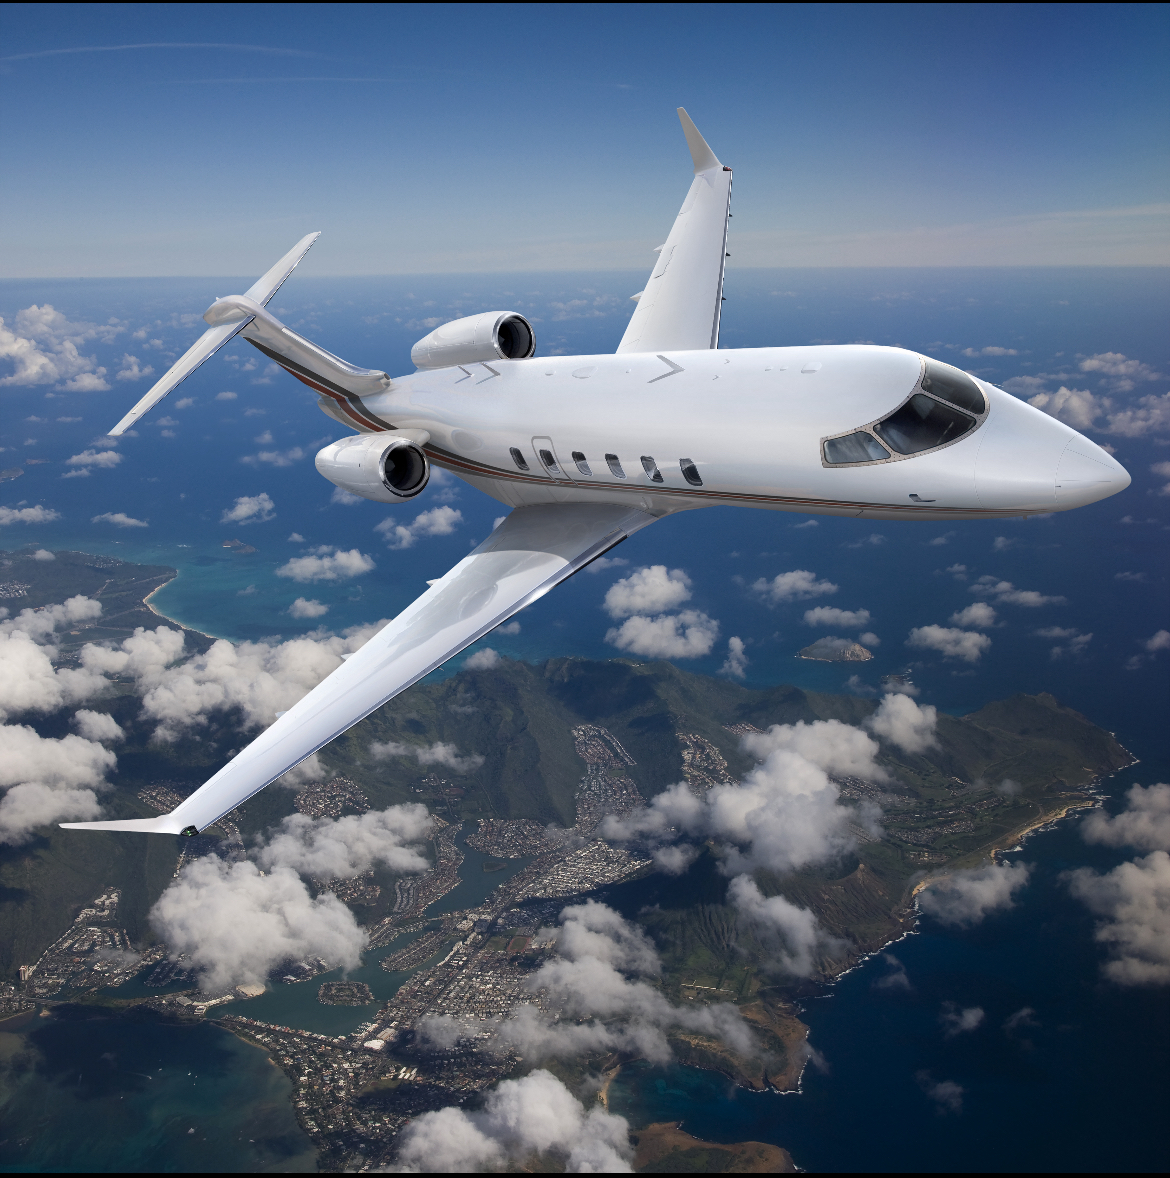 NetJets adds 12 Challenger 3500s its fleet with options for up to 232 more.